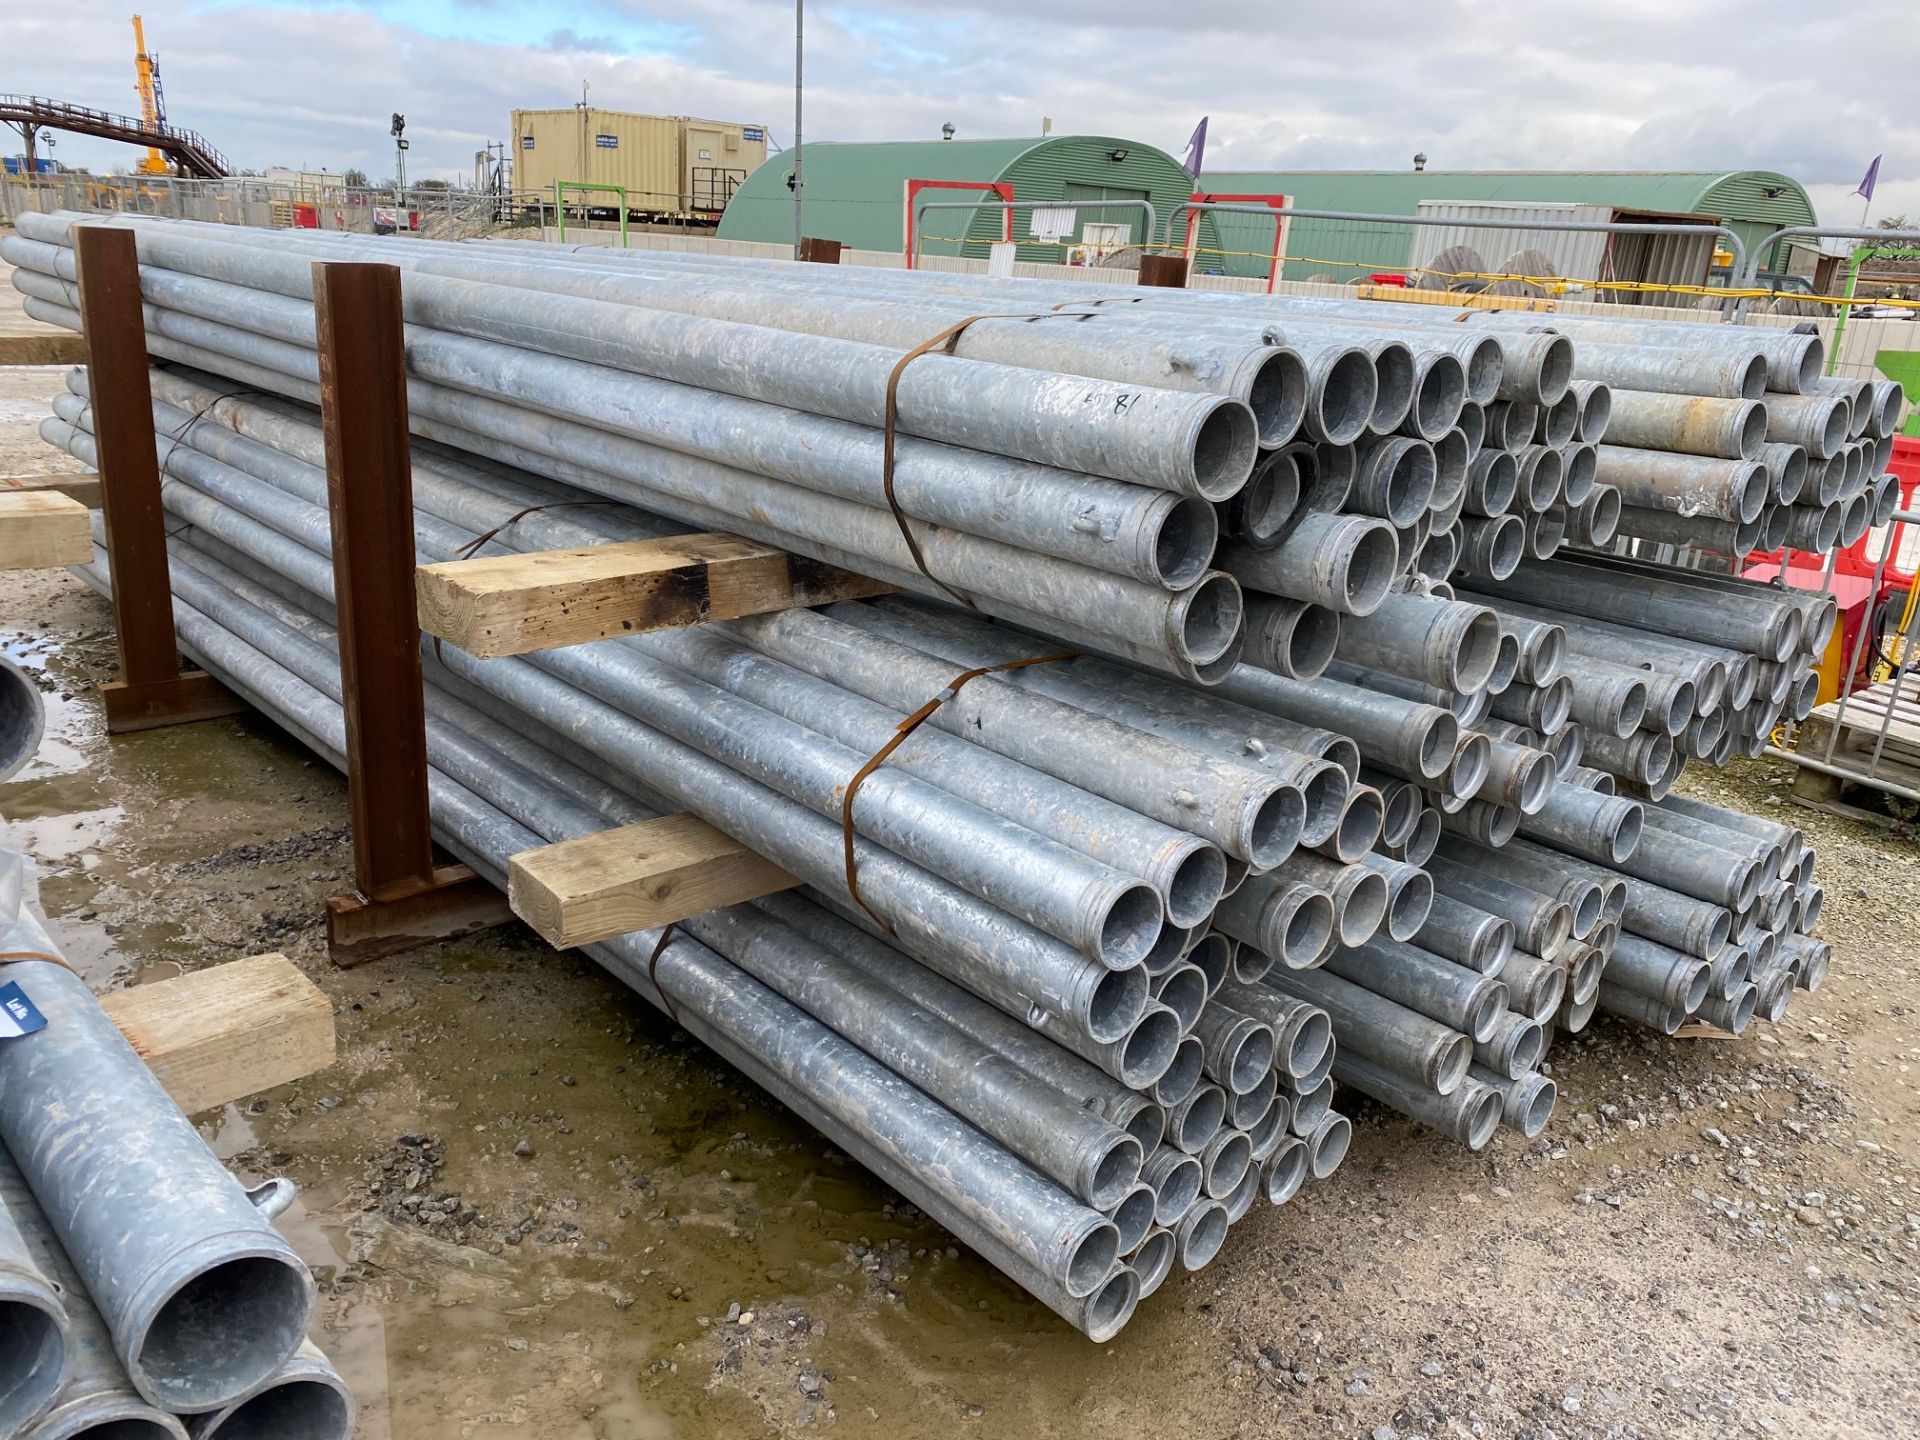 Approx. 300 x Galvanised Pipe Sections, Pre-Used On The Tunnel Boring Machine, Approx. Size Each